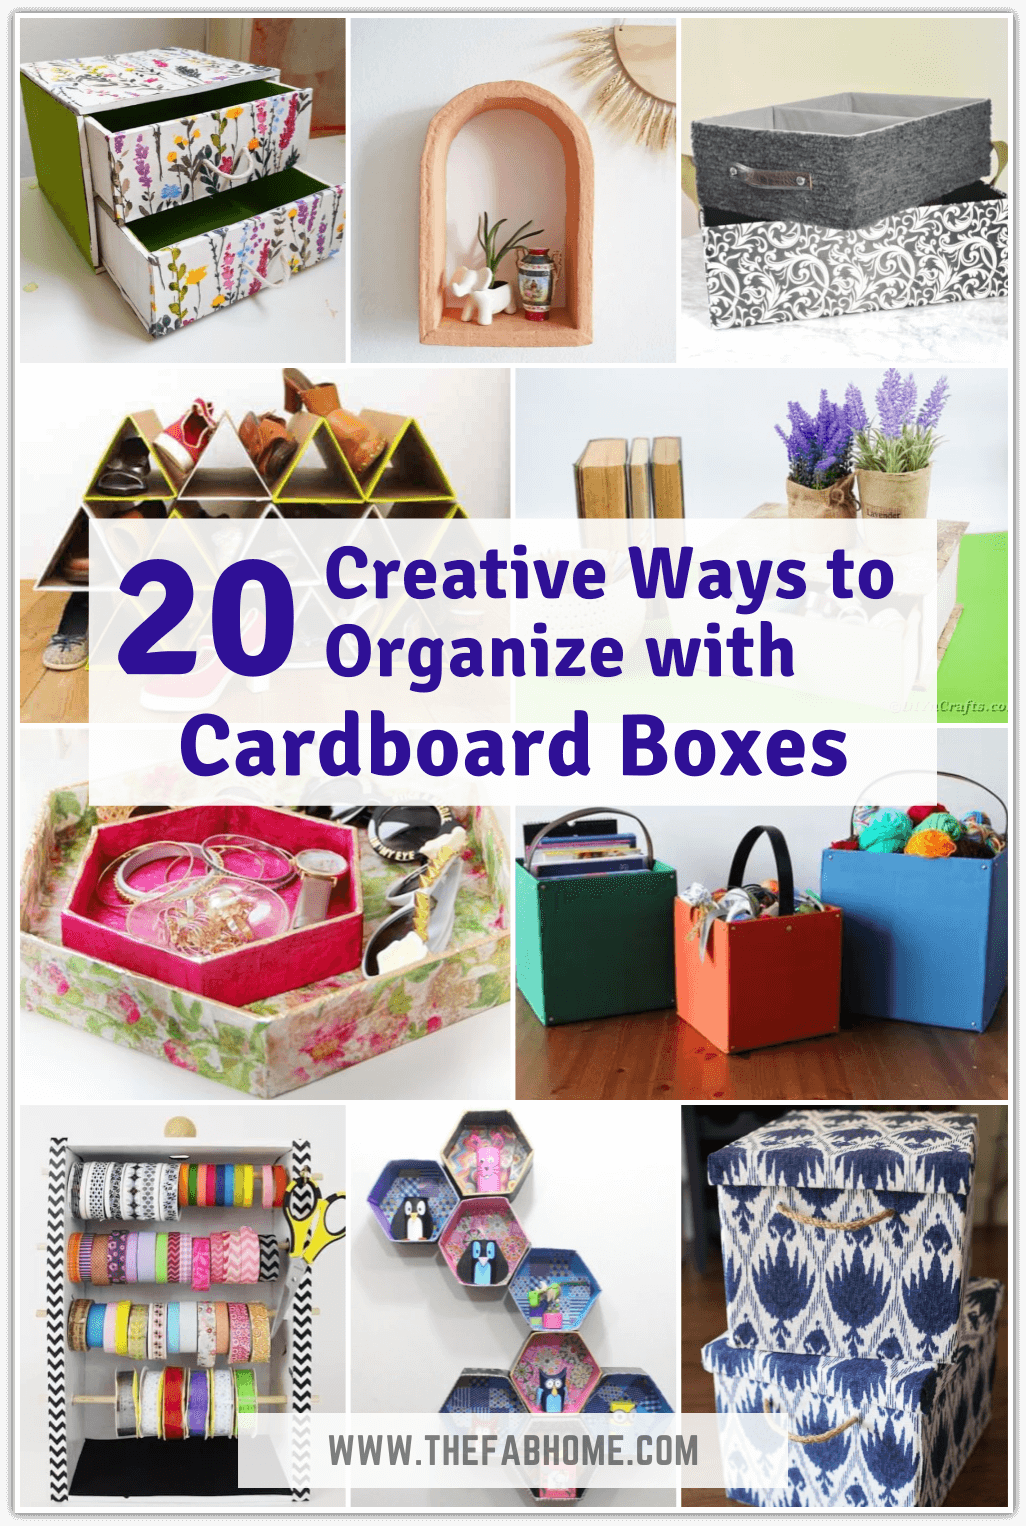 https://thefabhome.com/wp-content/uploads/2021/06/Ways-to-Organize-with-Cardboard-Boxes_Pin.png